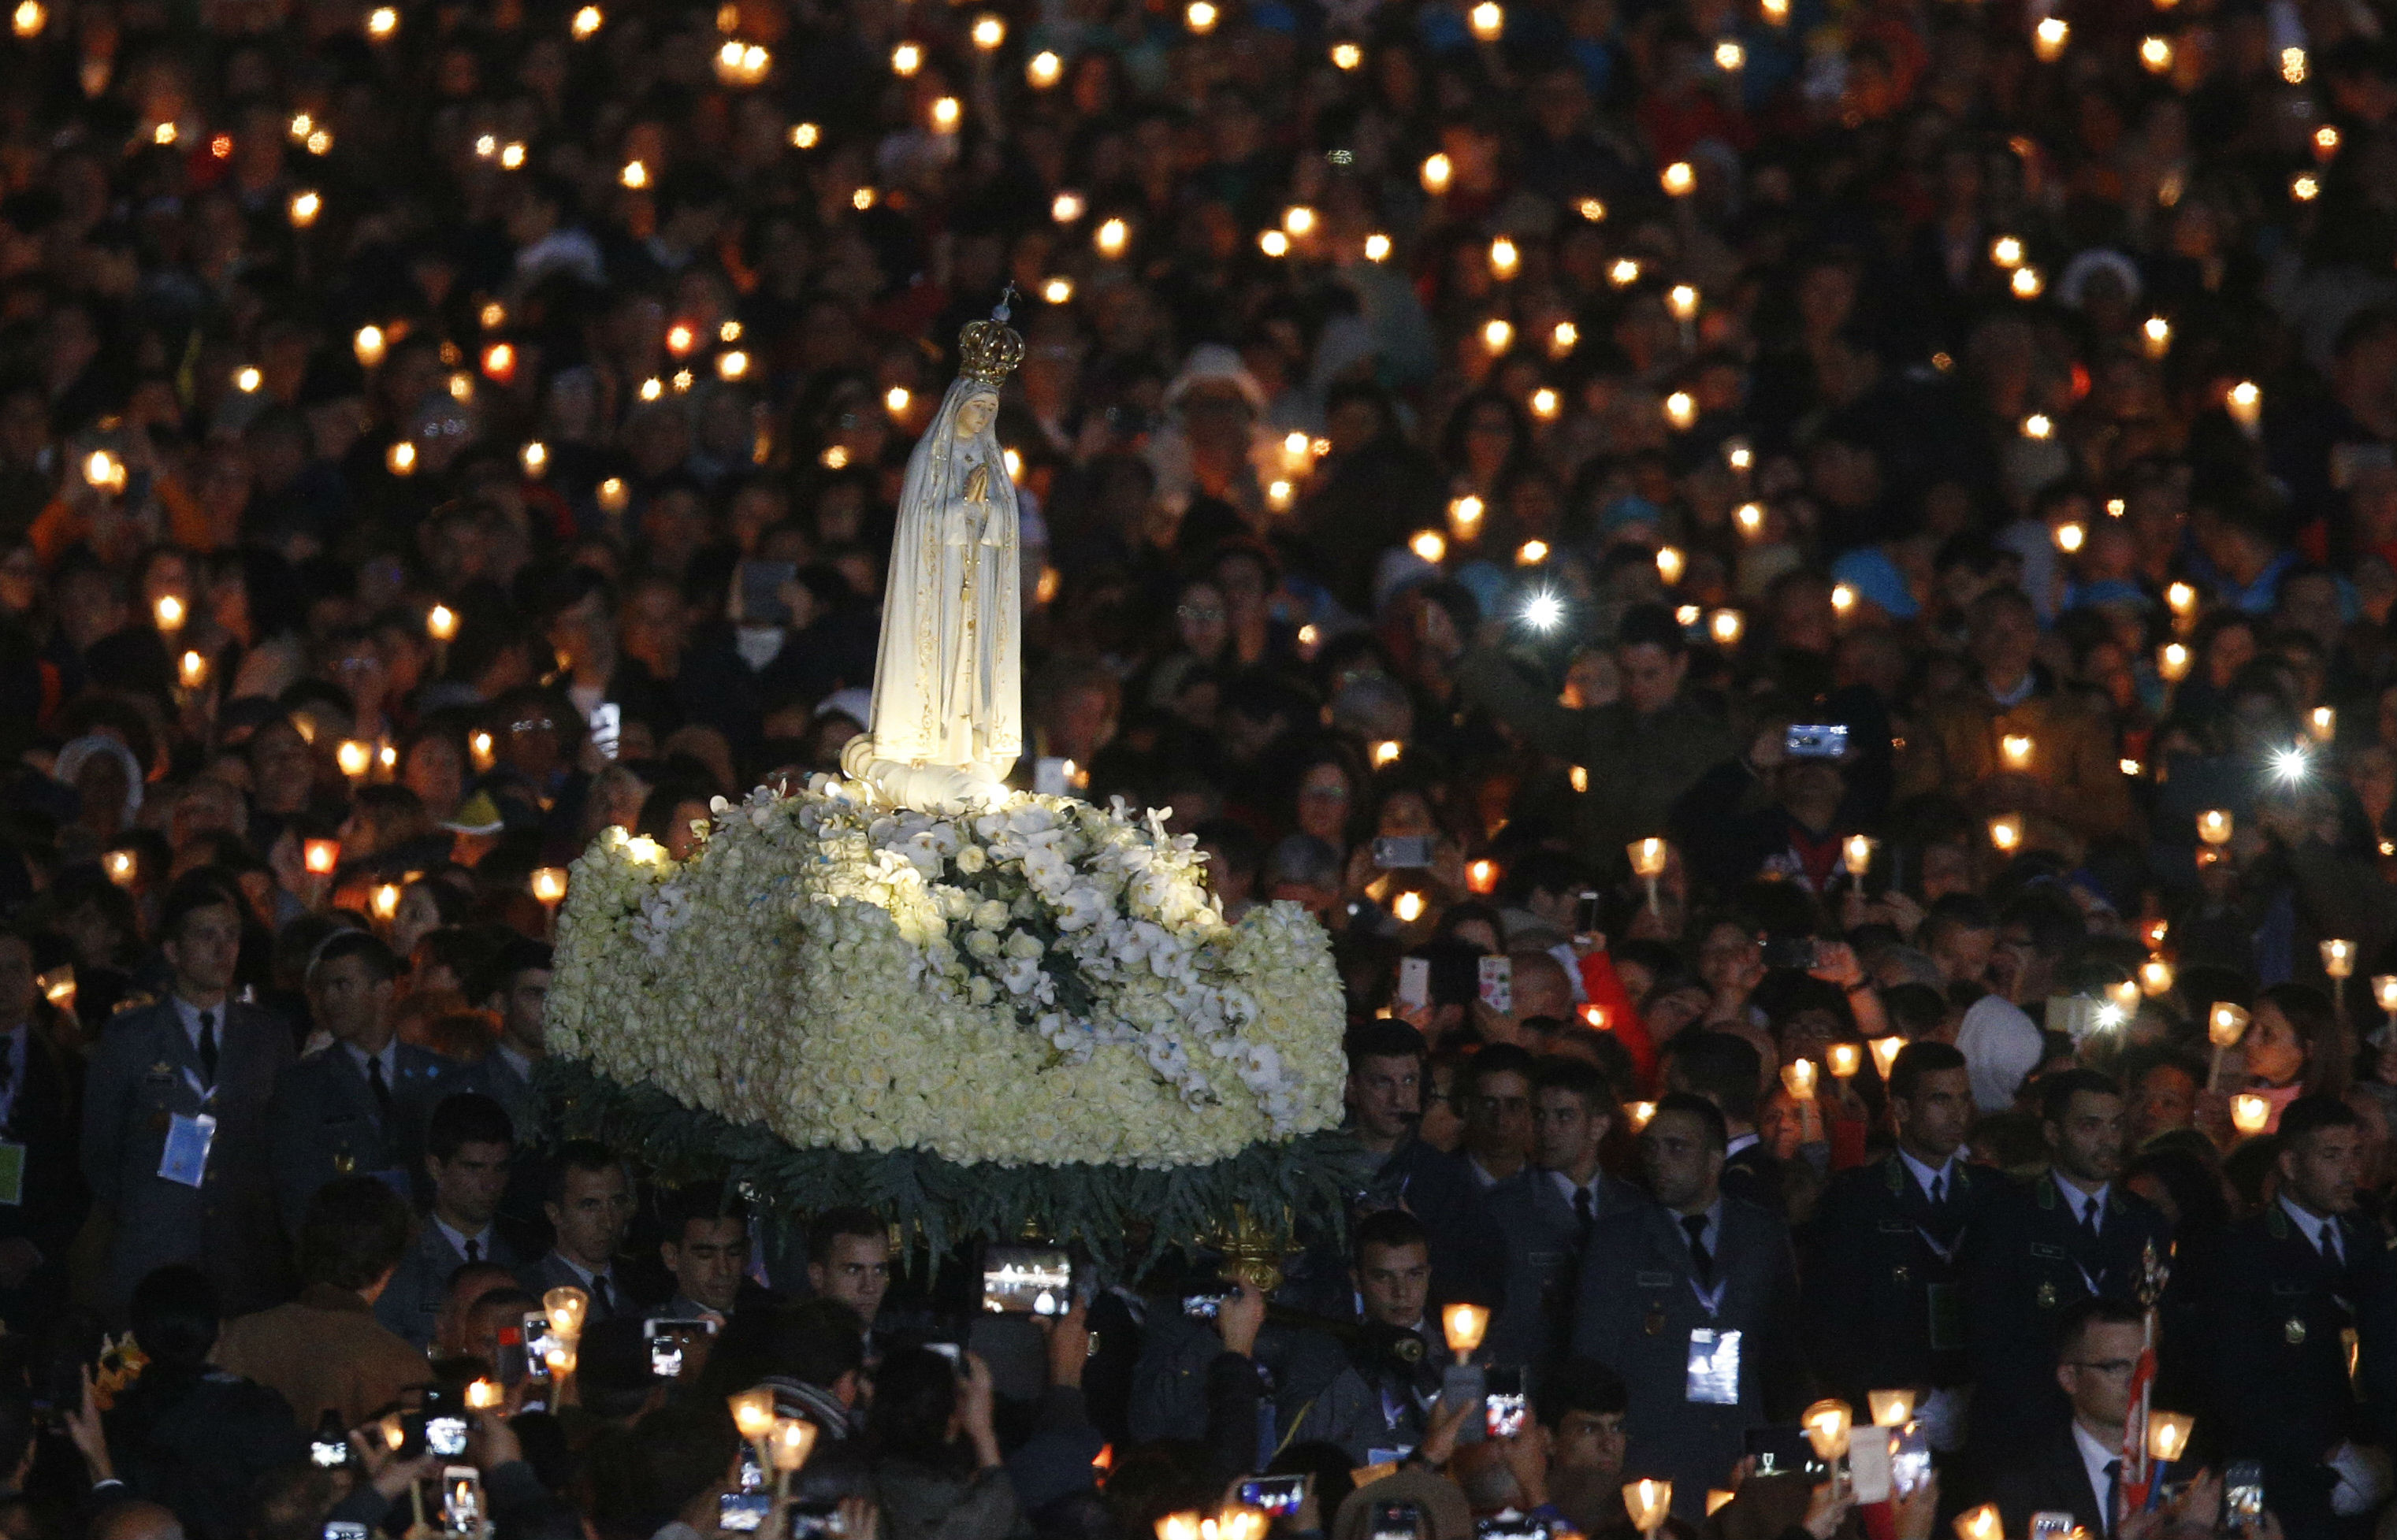 Message of peace given at Fatima still 'timely and urgent' 100 years later, says UN panel 